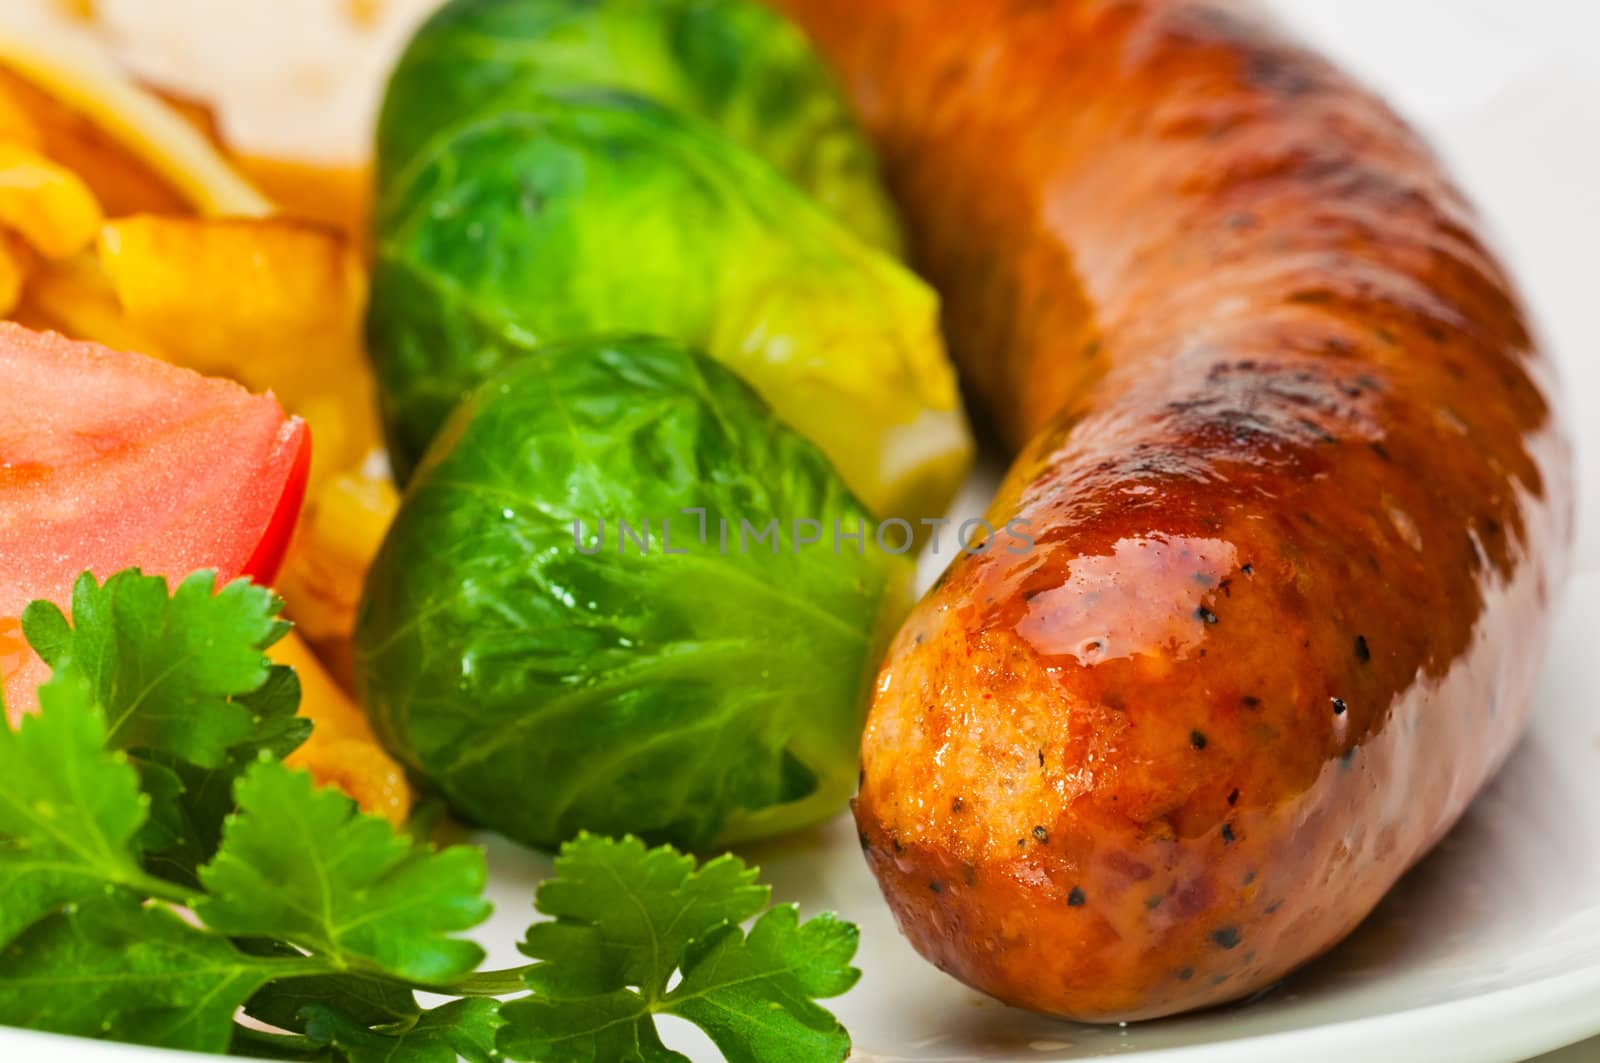 German sausage with potatoes, cabbage and other vegetables.